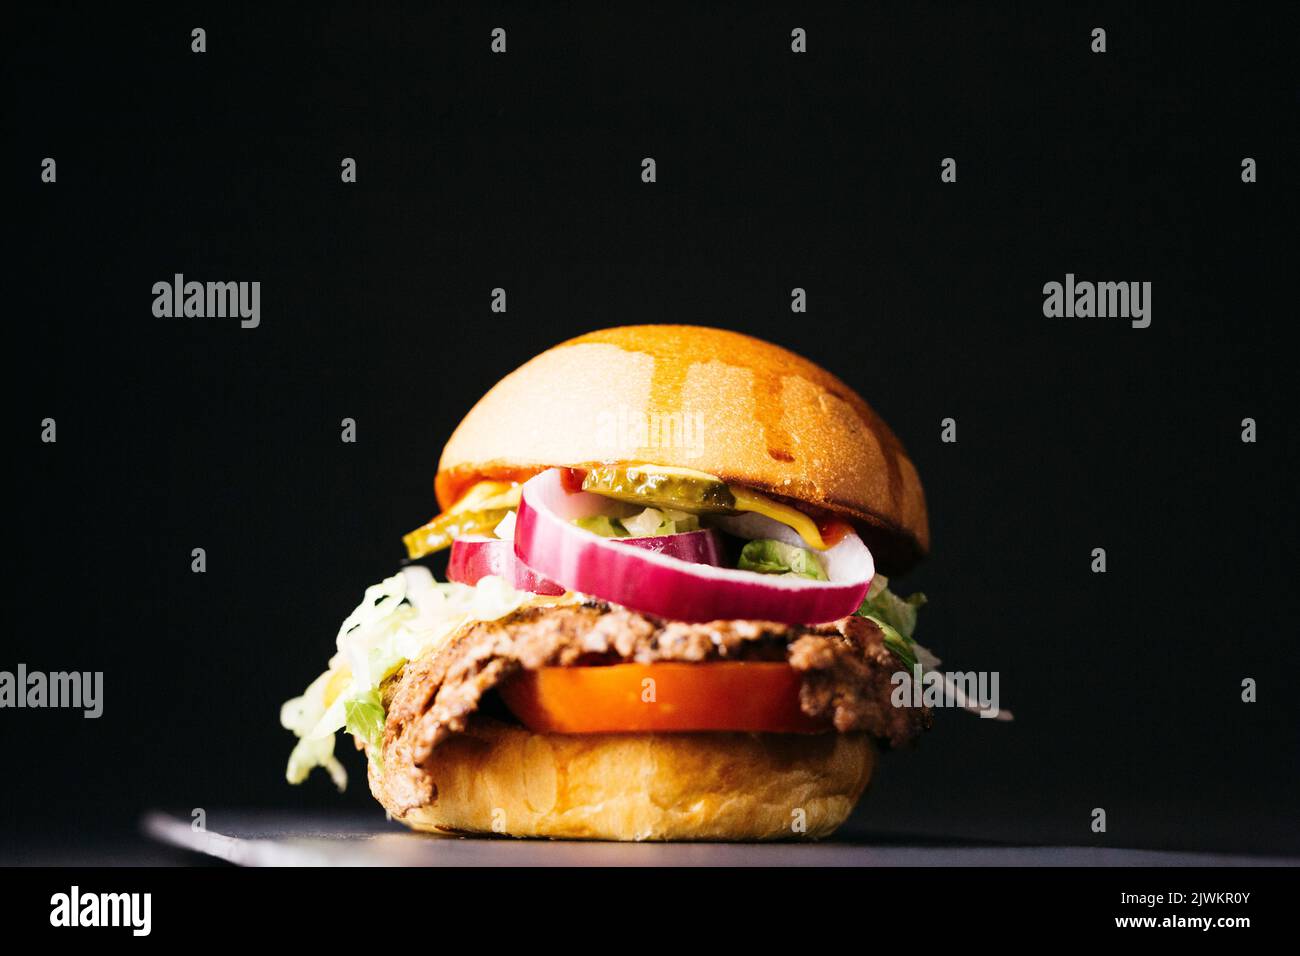 Doble cheeseburger with vegetables over a black background Stock Photo